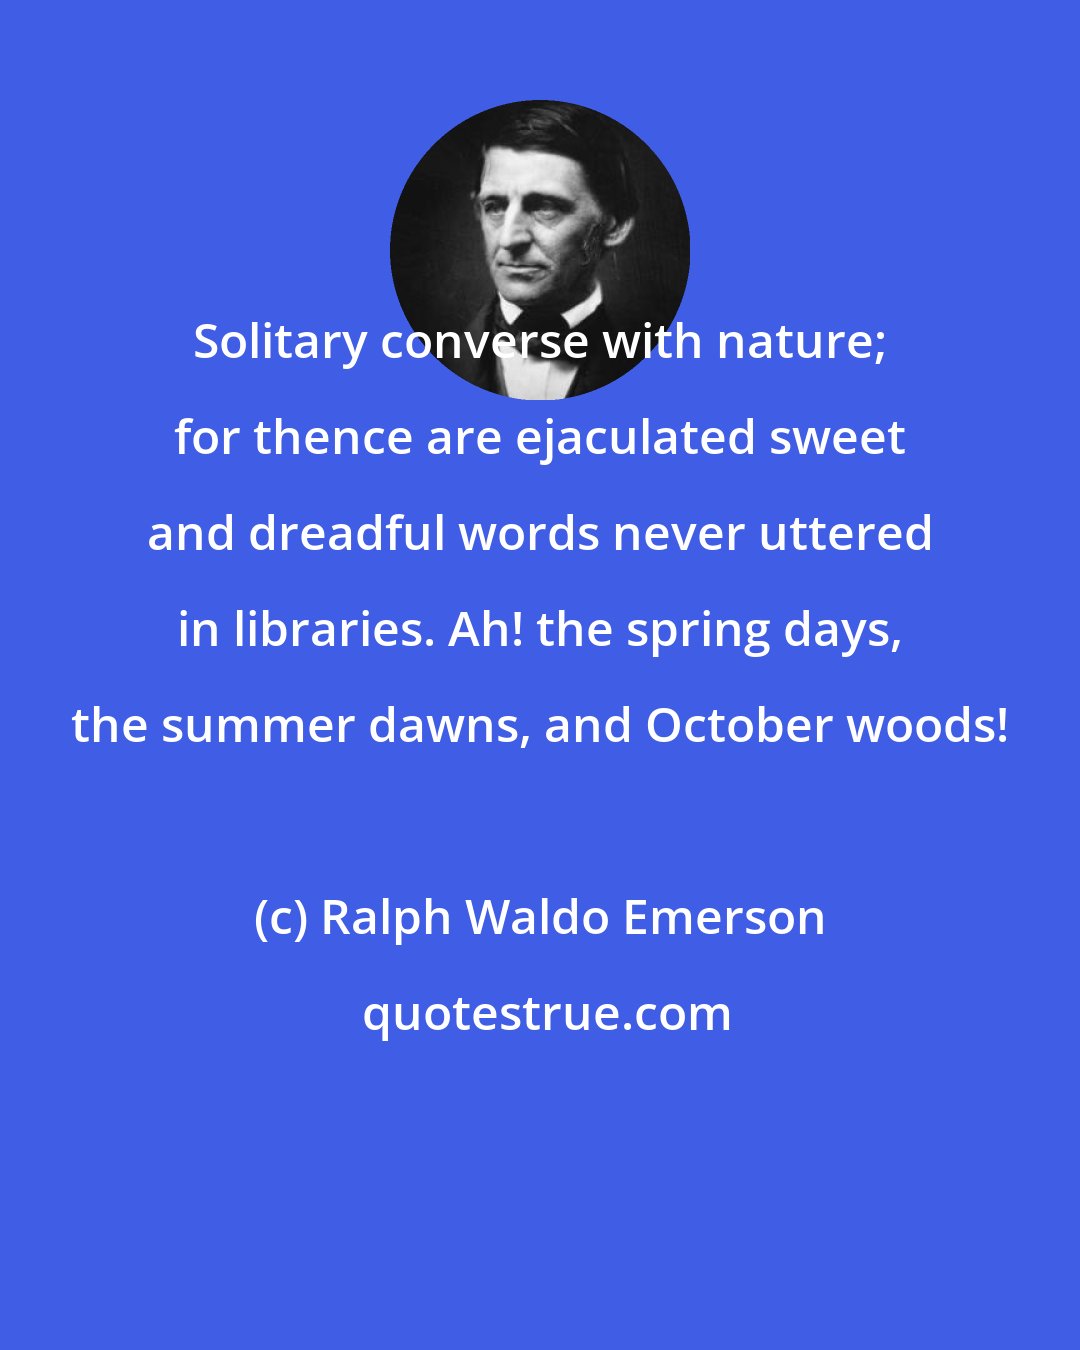 Ralph Waldo Emerson: Solitary converse with nature; for thence are ejaculated sweet and dreadful words never uttered in libraries. Ah! the spring days, the summer dawns, and October woods!